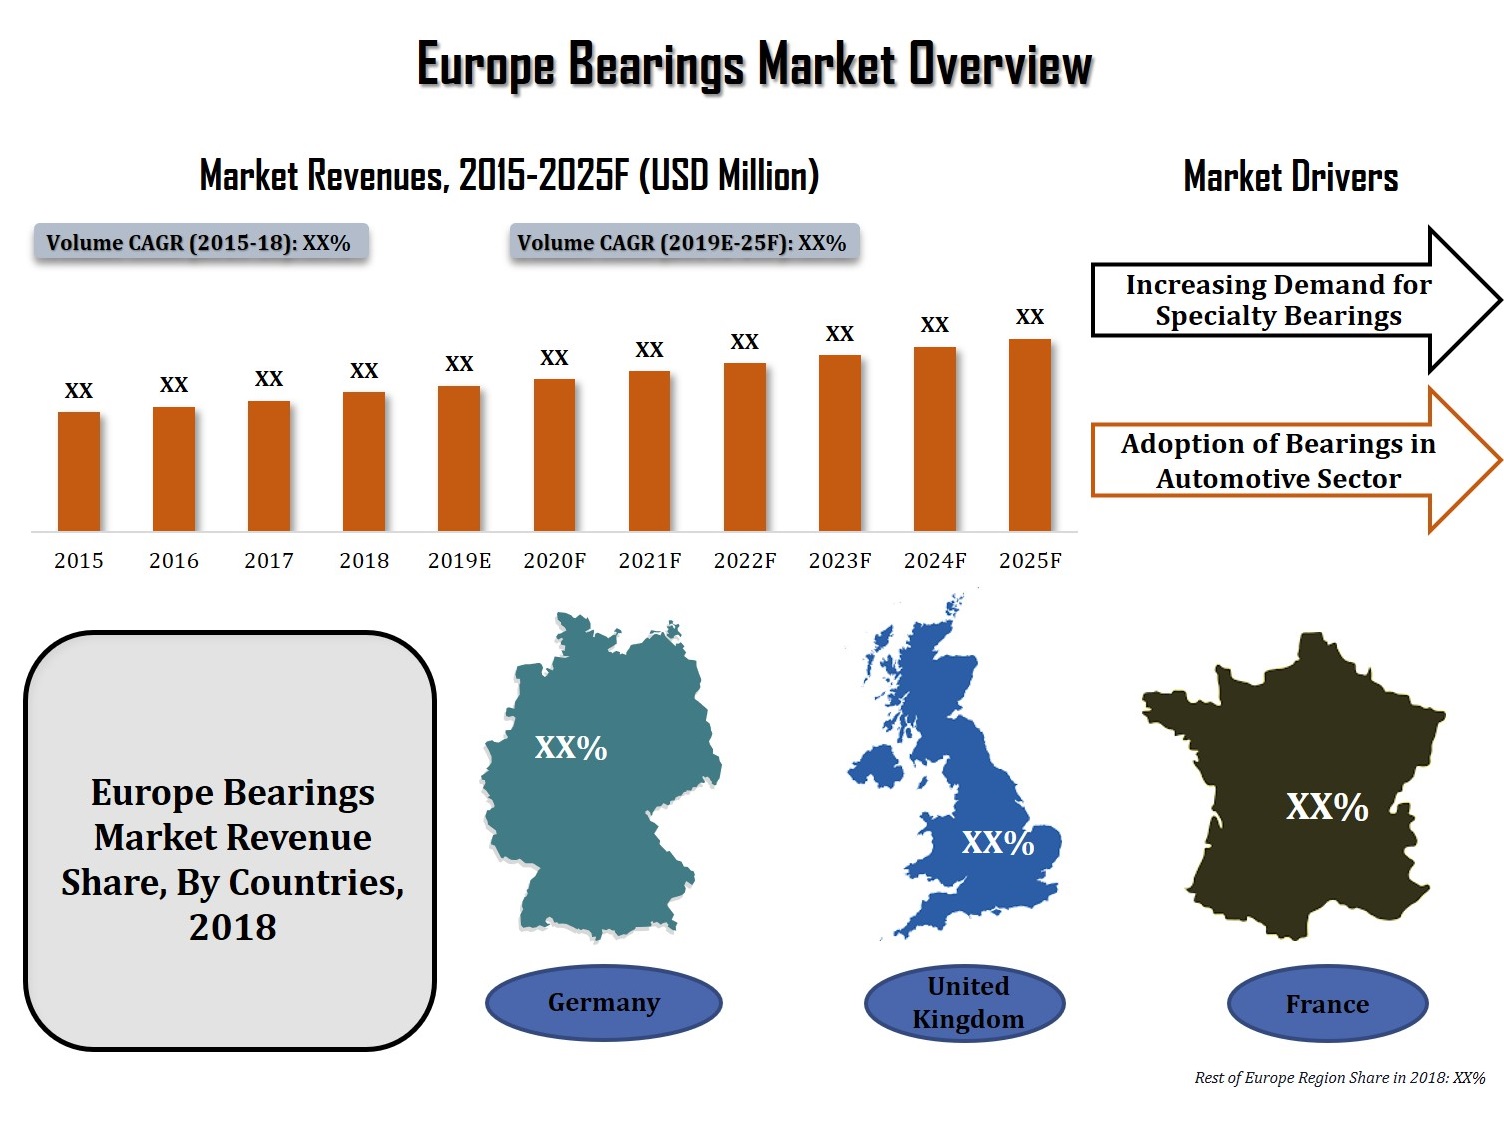 Europe Bearing Market Overview